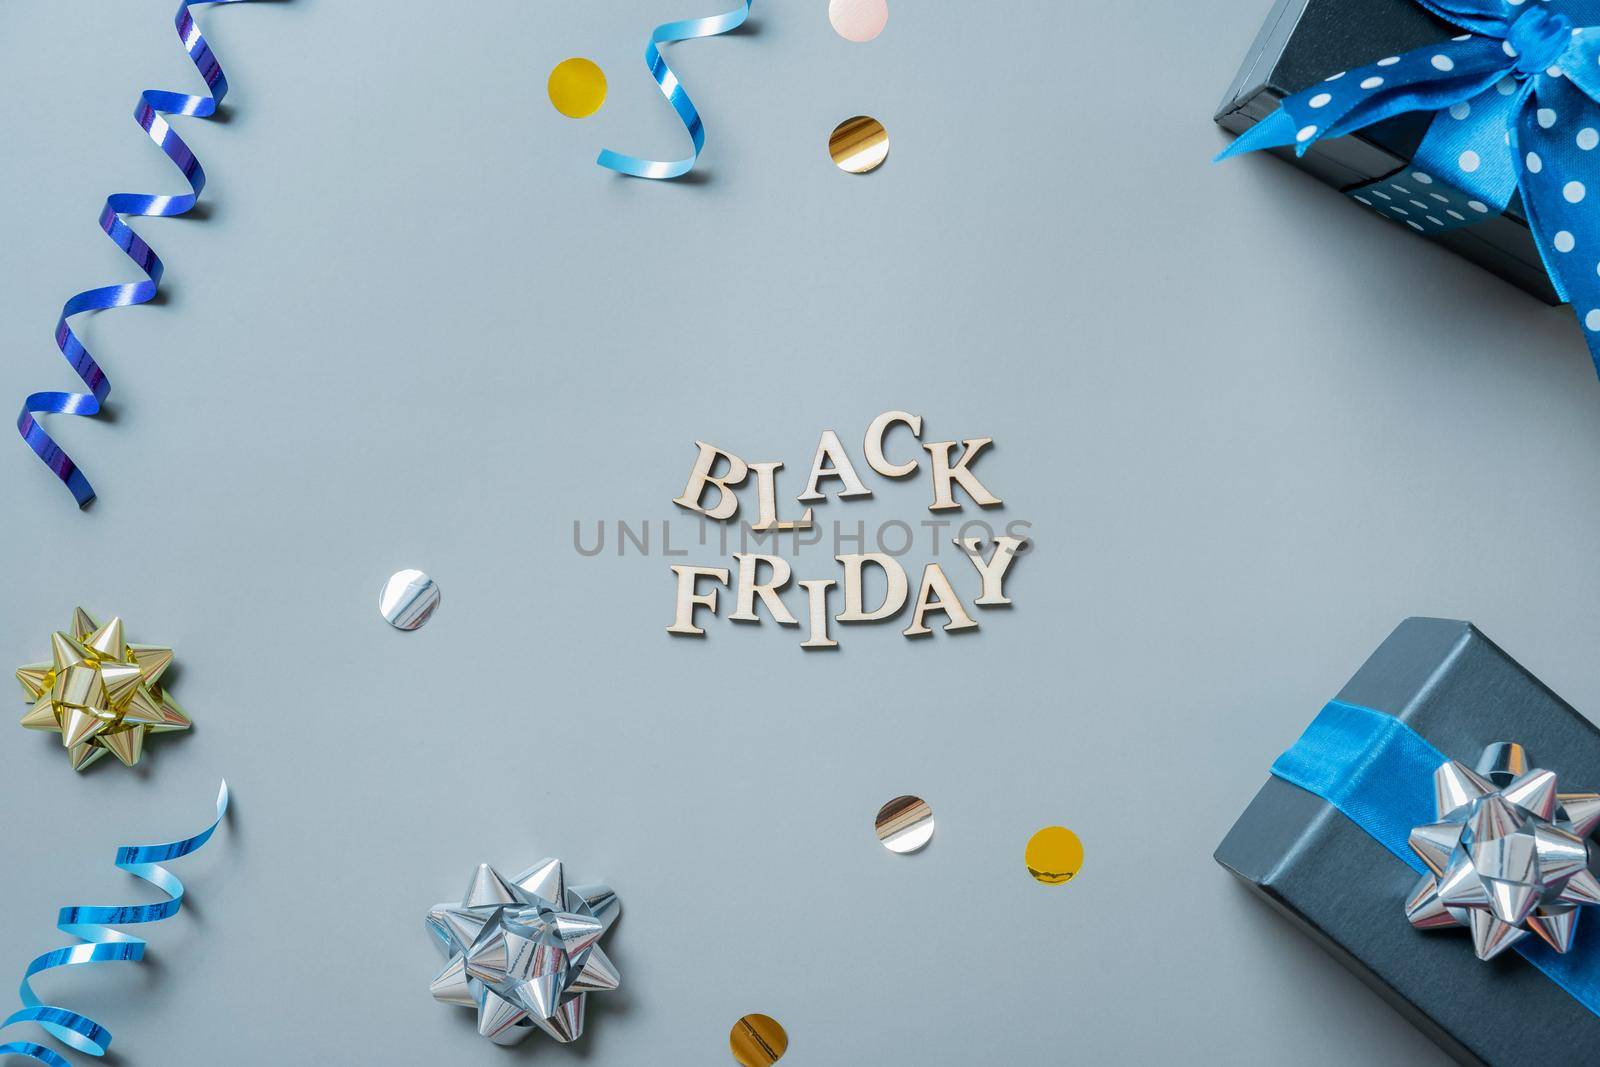 Black friday text with gifts and festive tinsel flat lay.